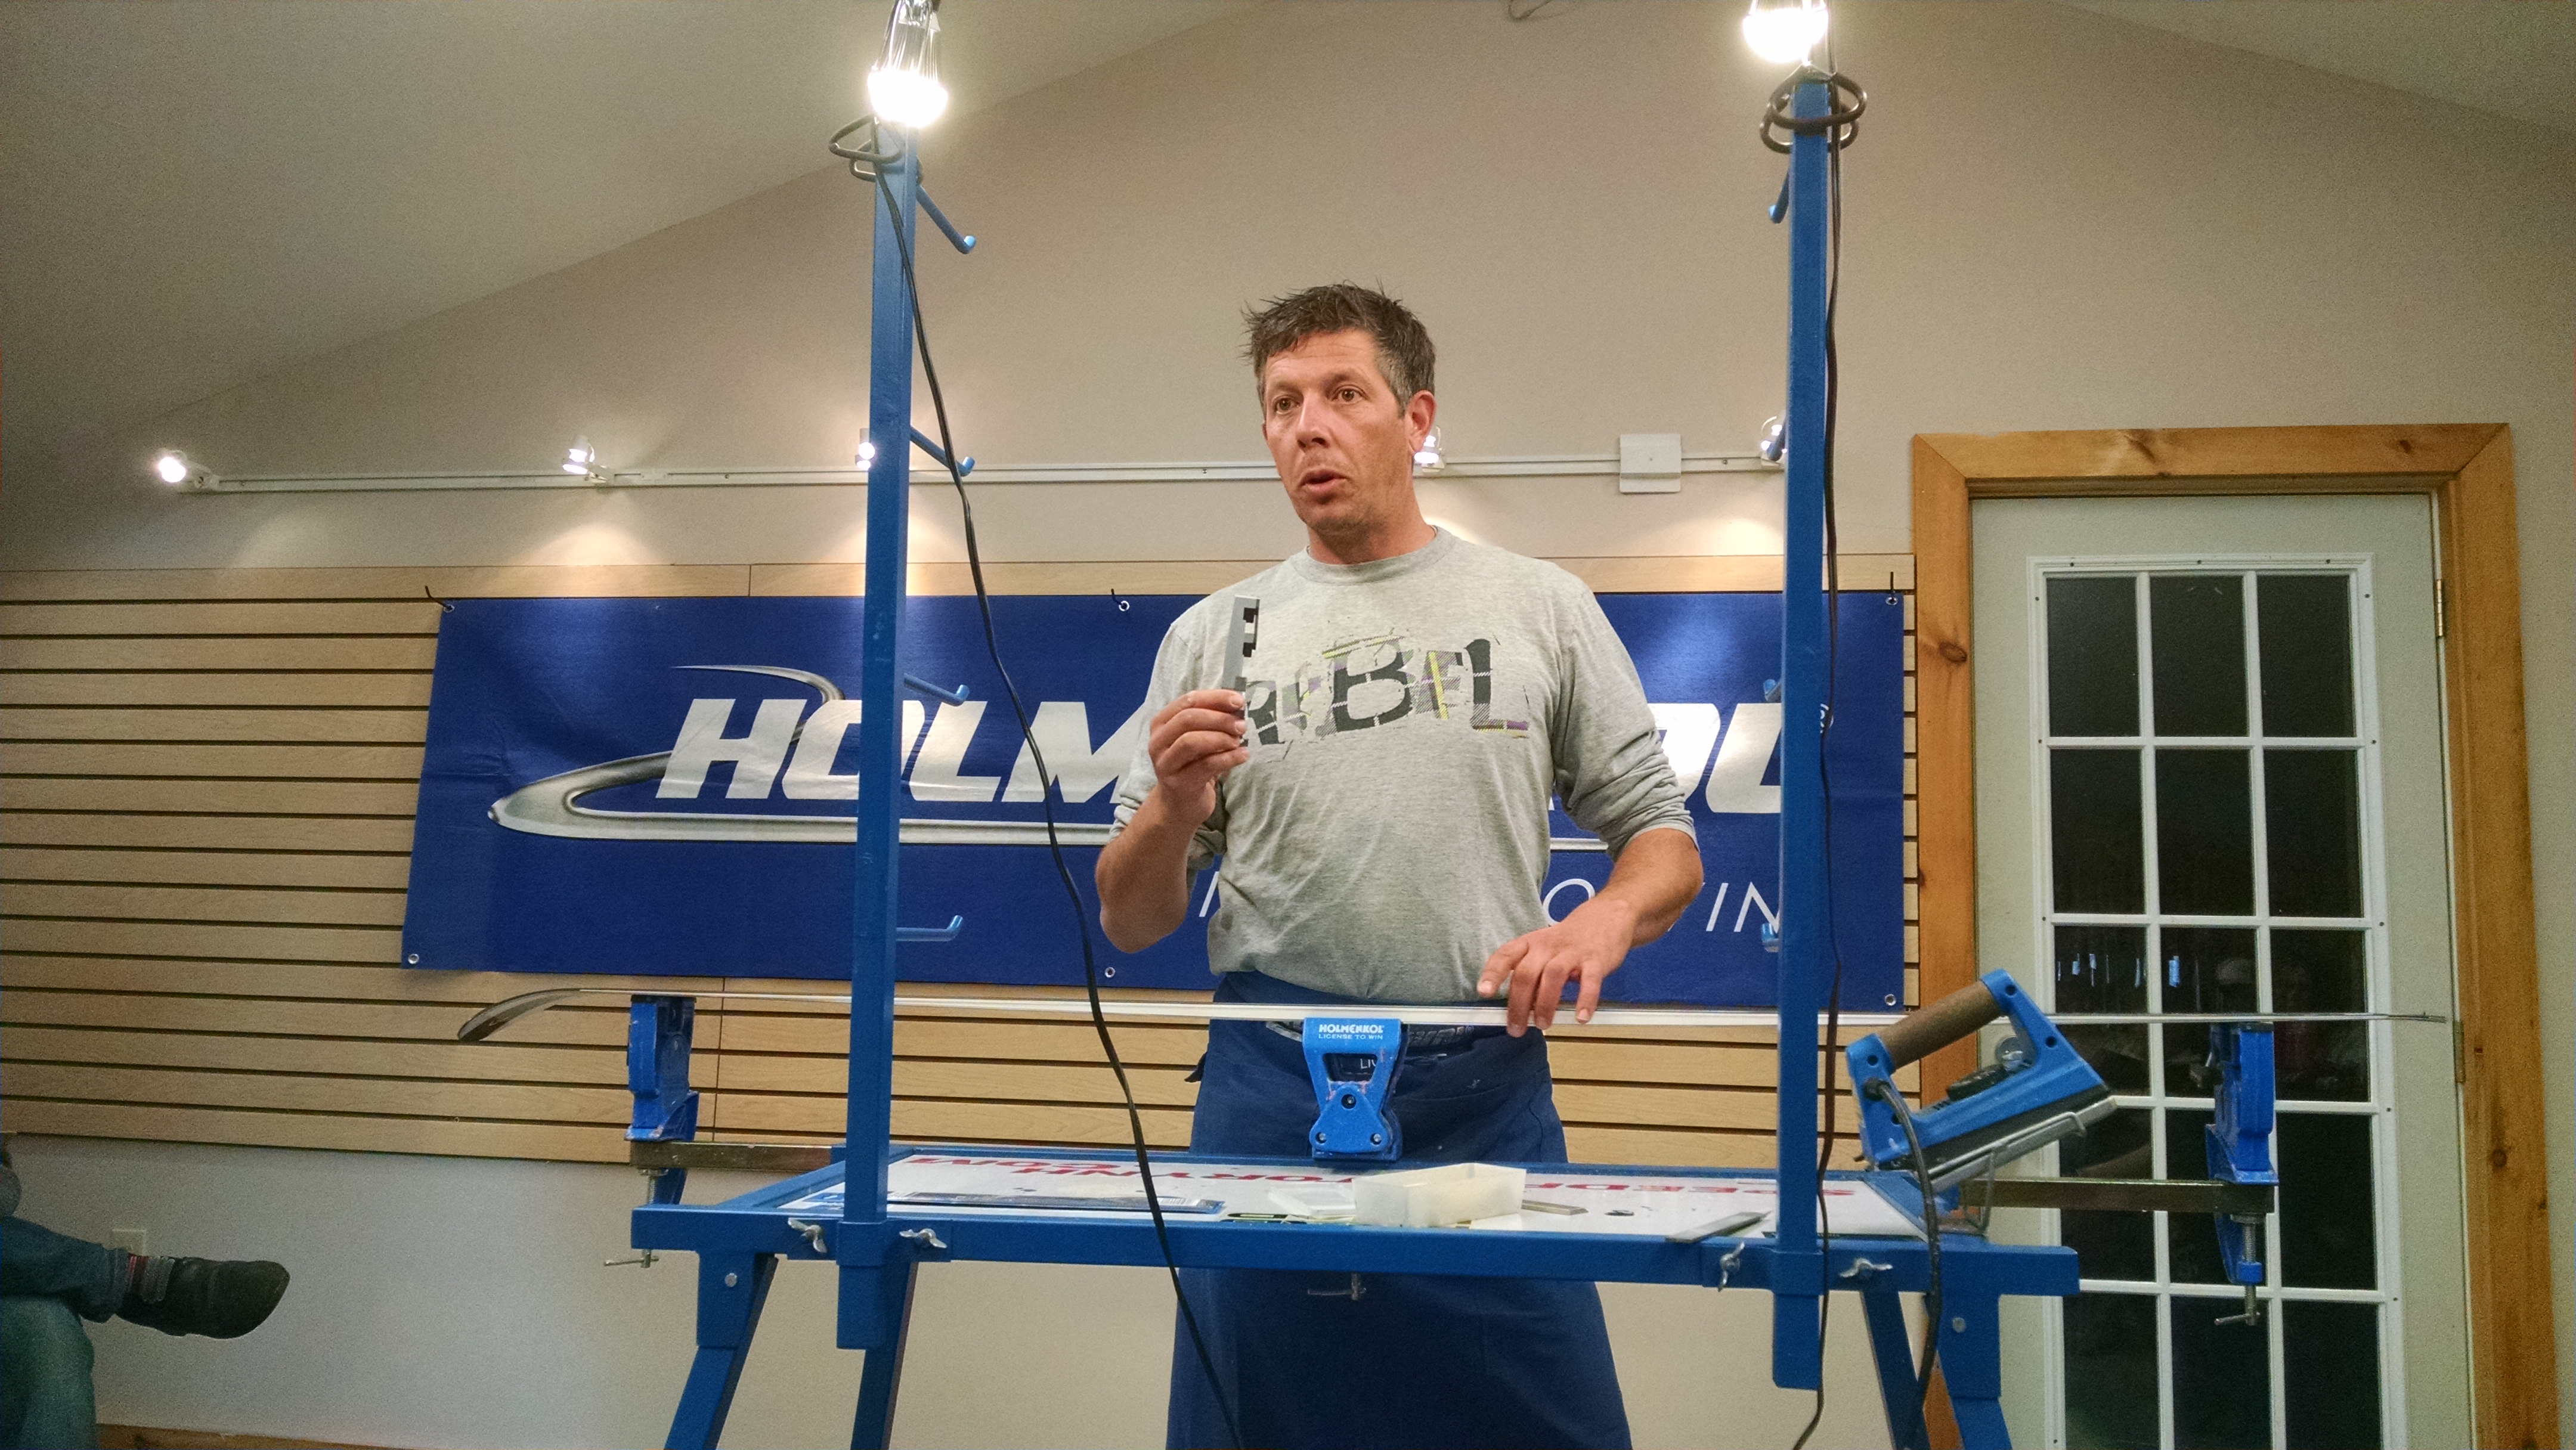 Alex Martin talking about using a file guide when hand tuning skis 2015